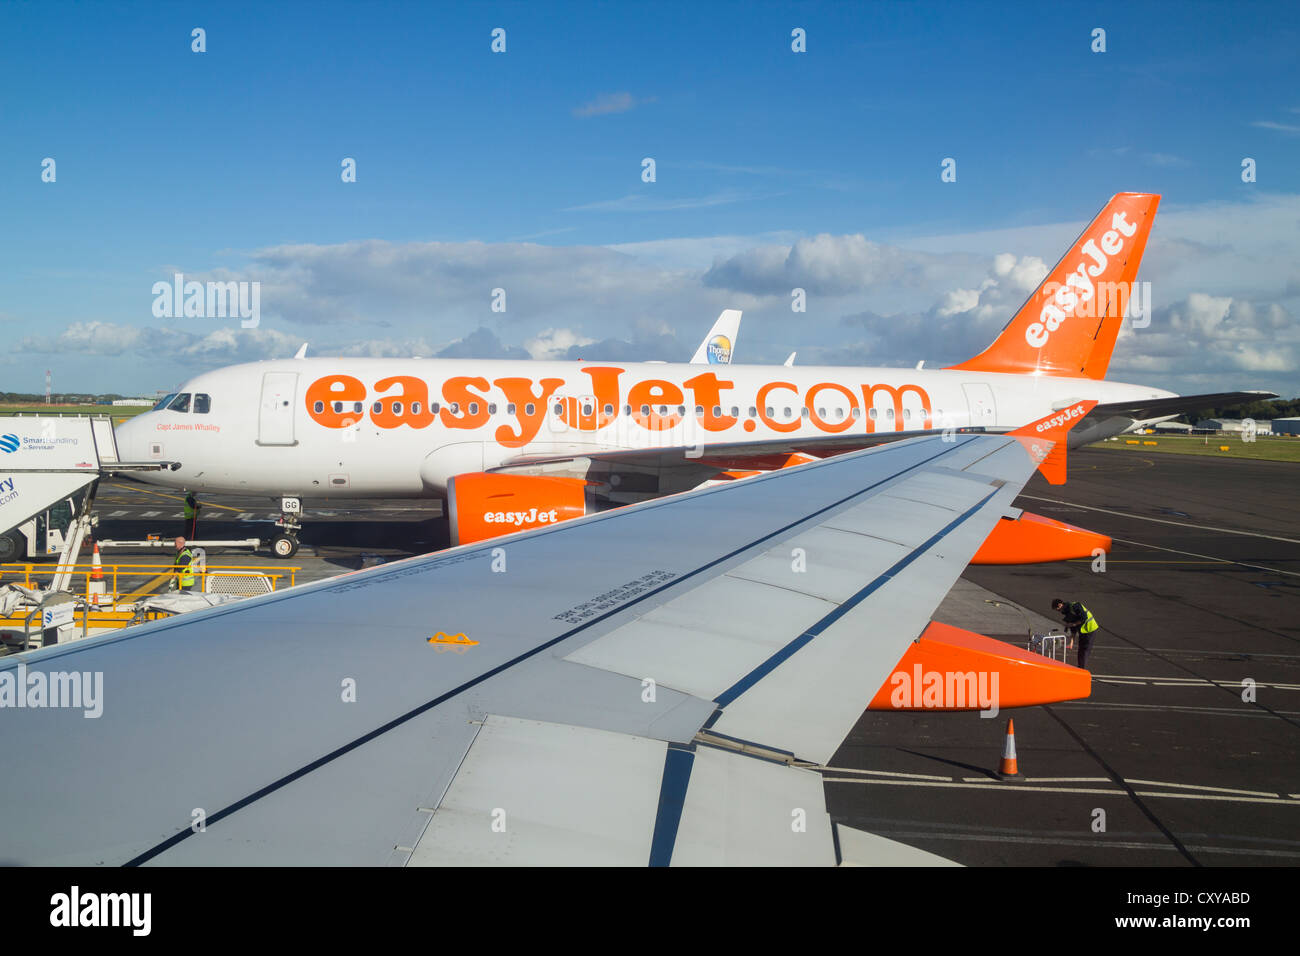 Esy Jet Airplanes On Runway At Newcastle Airport England Uk Stock Photo Alamy